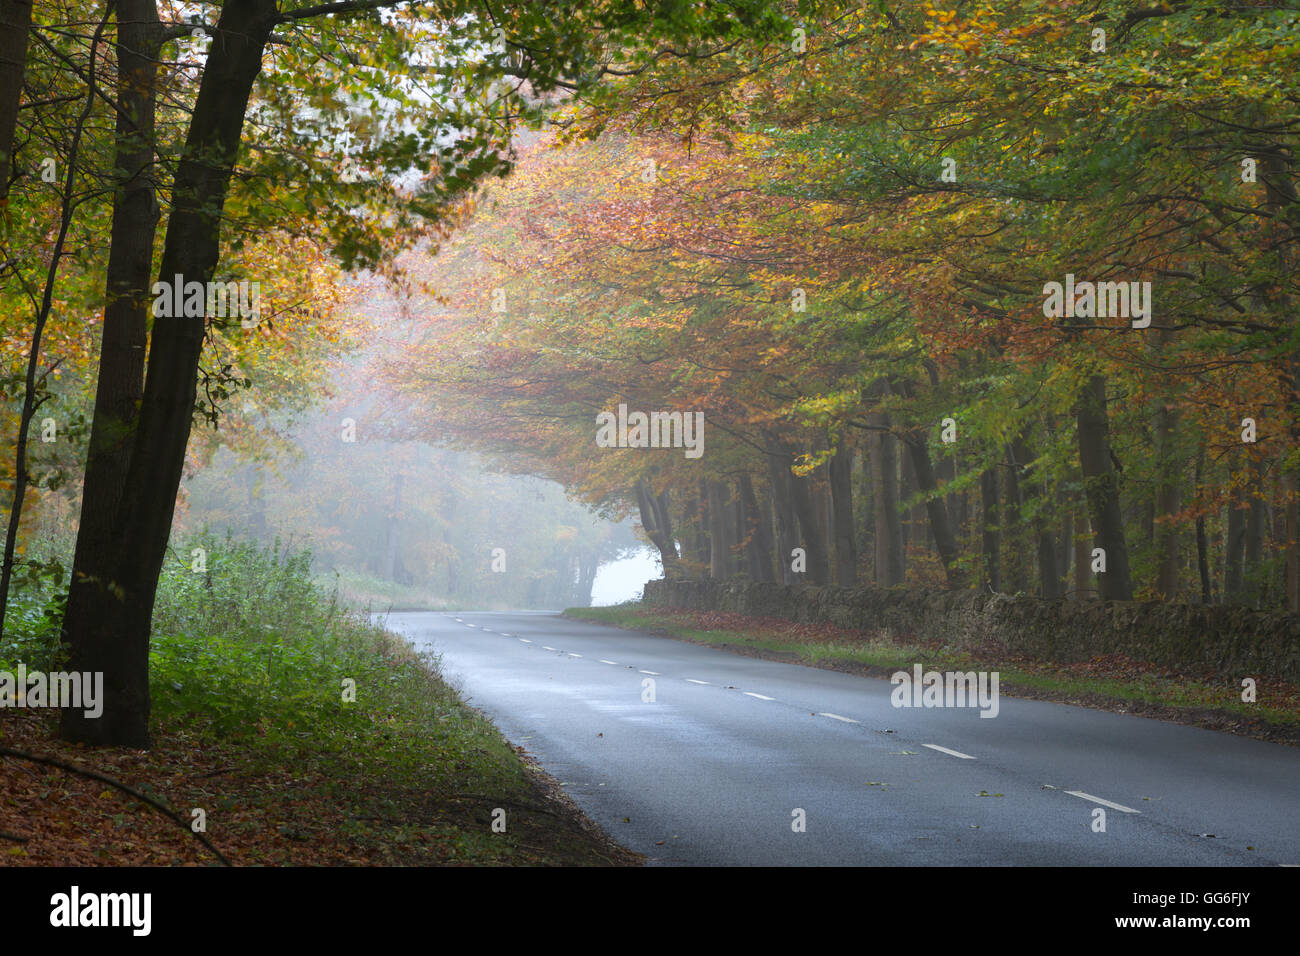 Road running through foggy autumnal woodland, near Stow-on-the-Wold, Cotswolds, Gloucestershire, England, United Kingdom, Europe Stock Photo